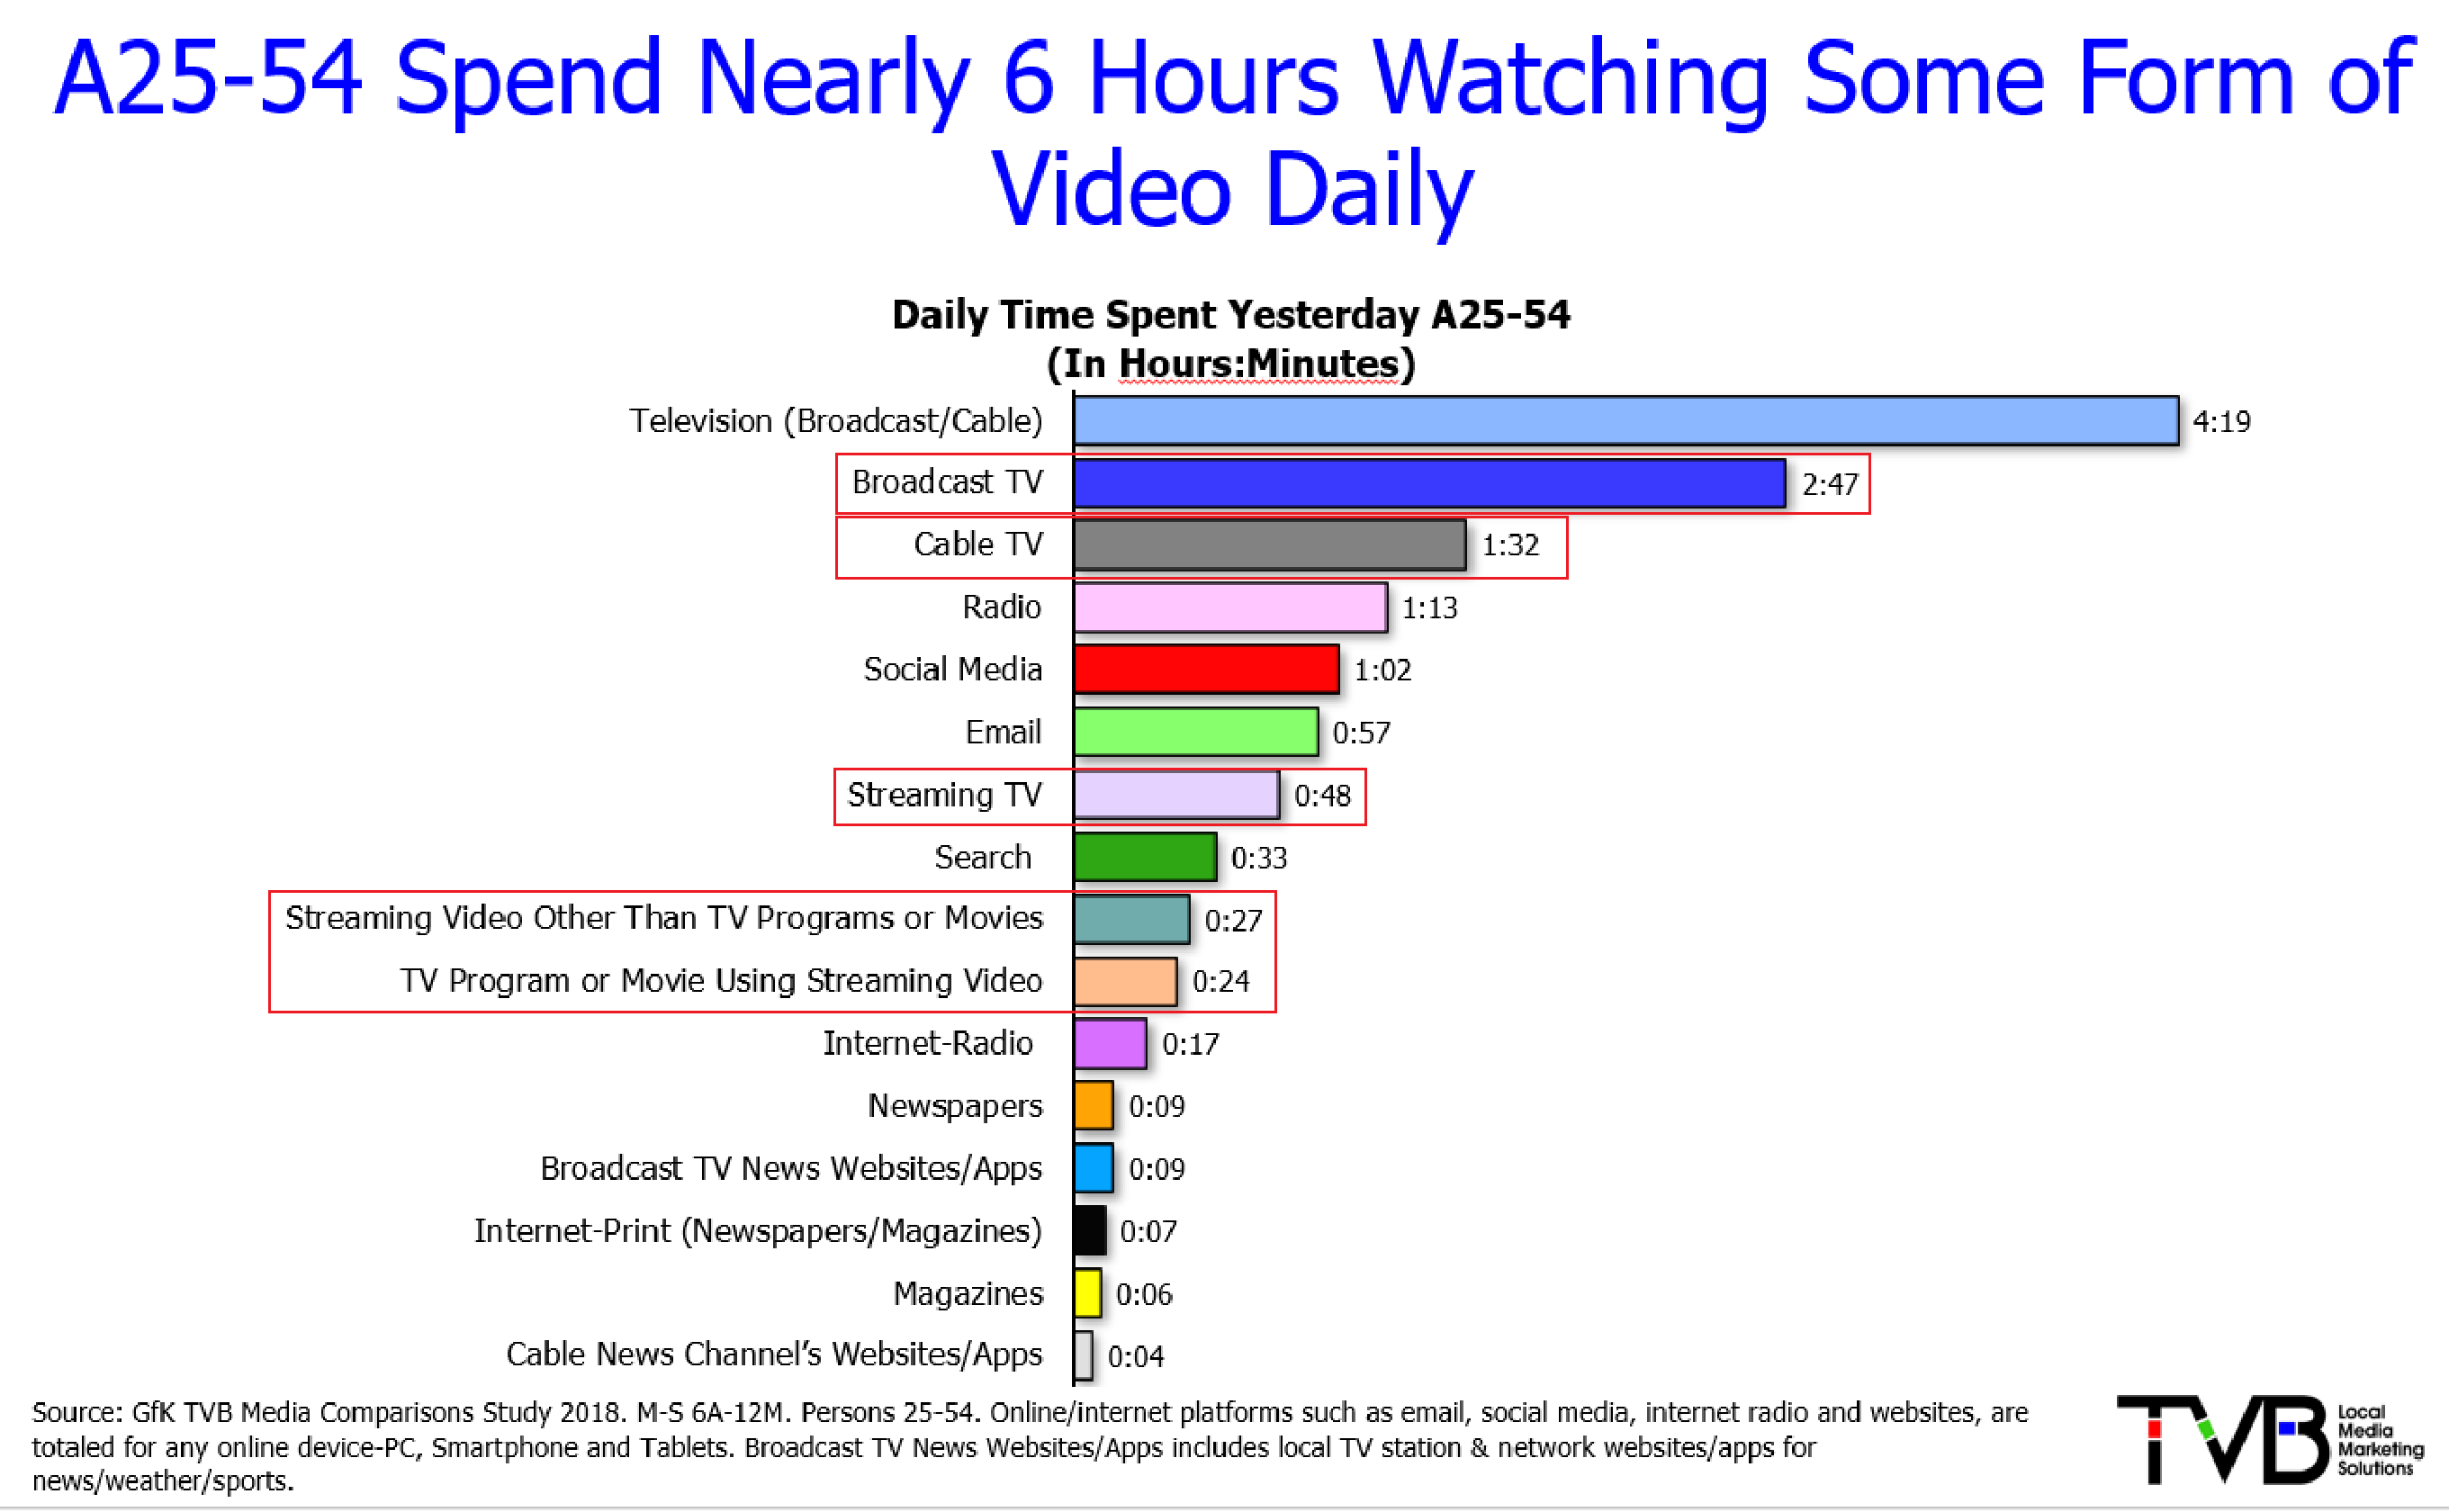 video time spent a25-54